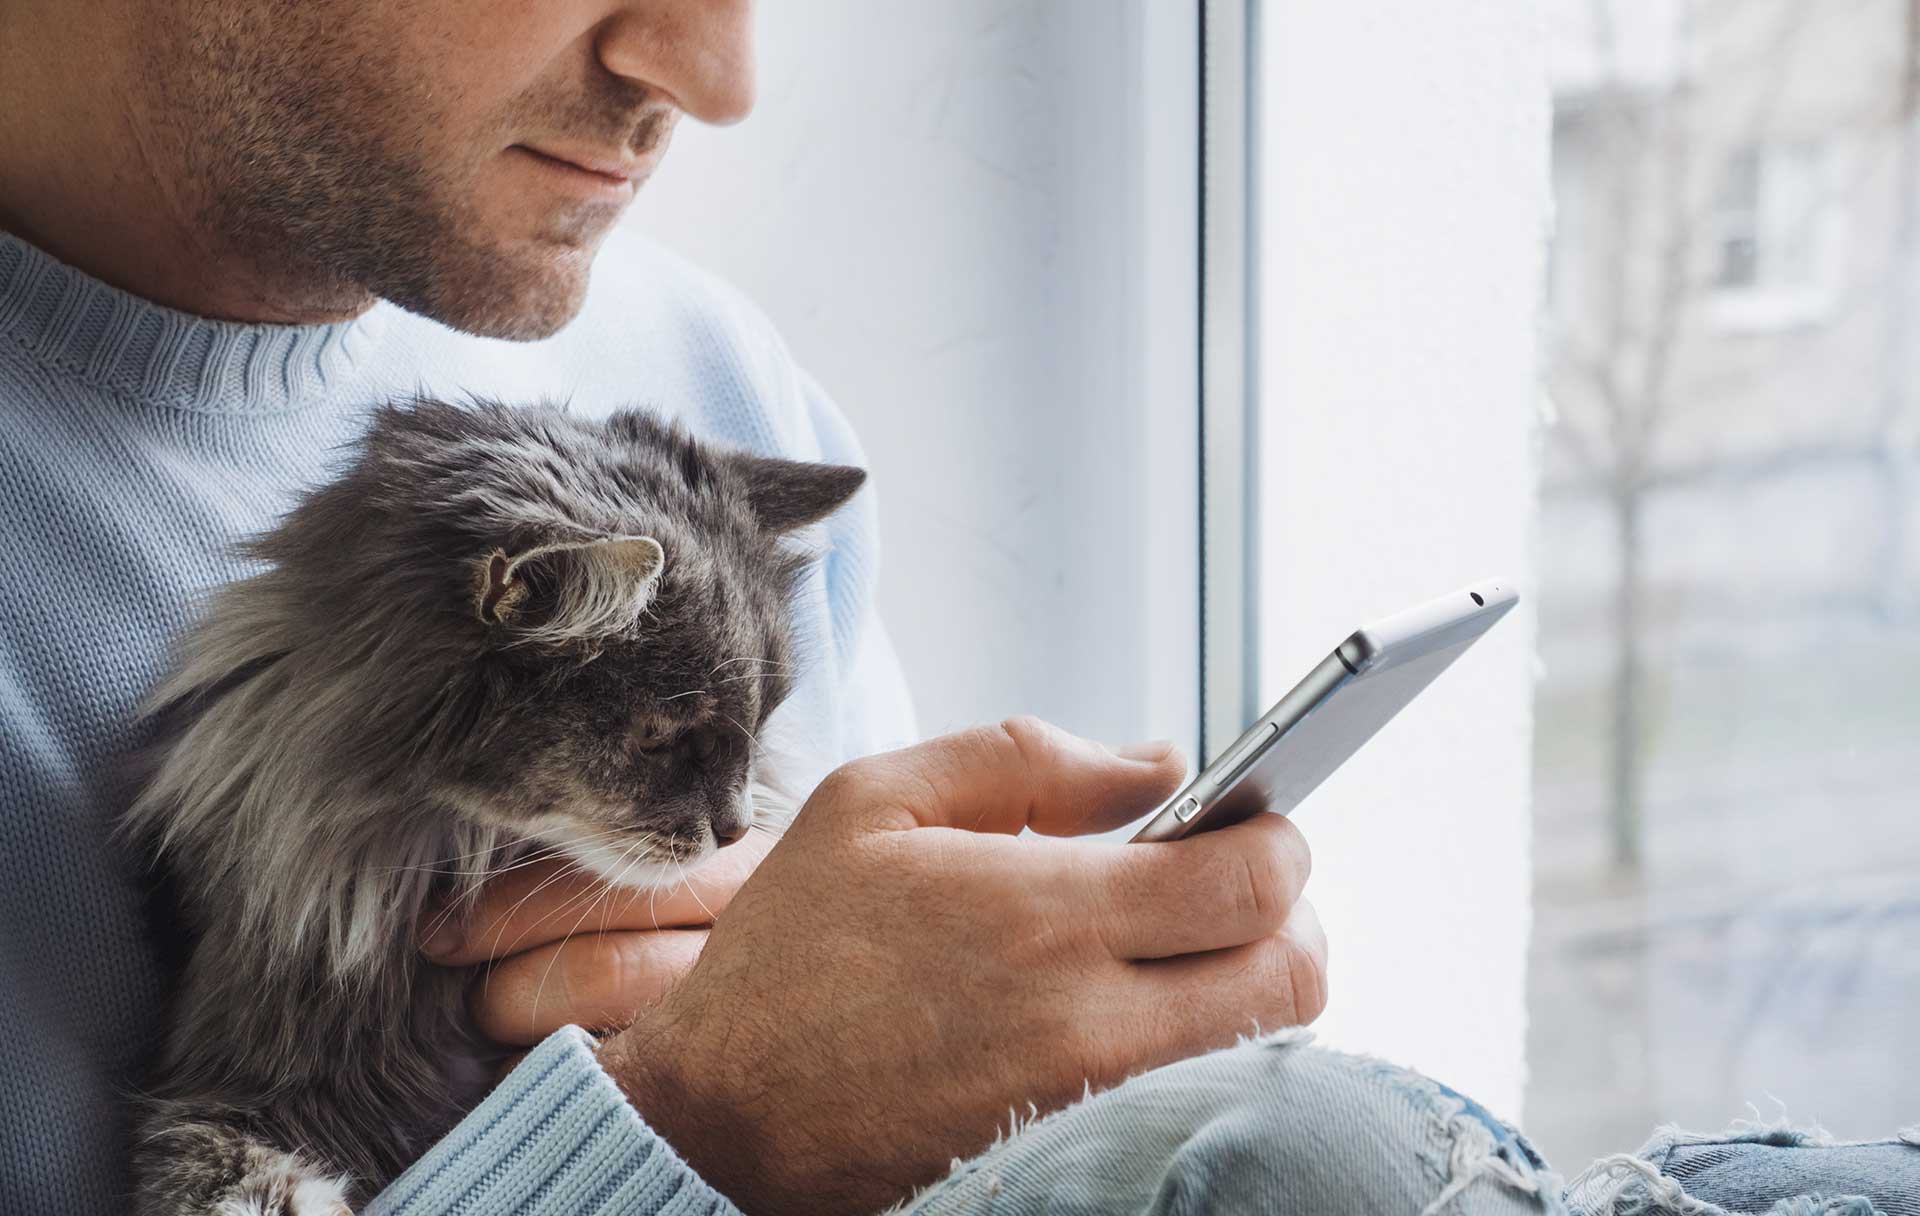 A man sits in a window looking at his smartphone. There is a grey, long-haired kitten in his arms.